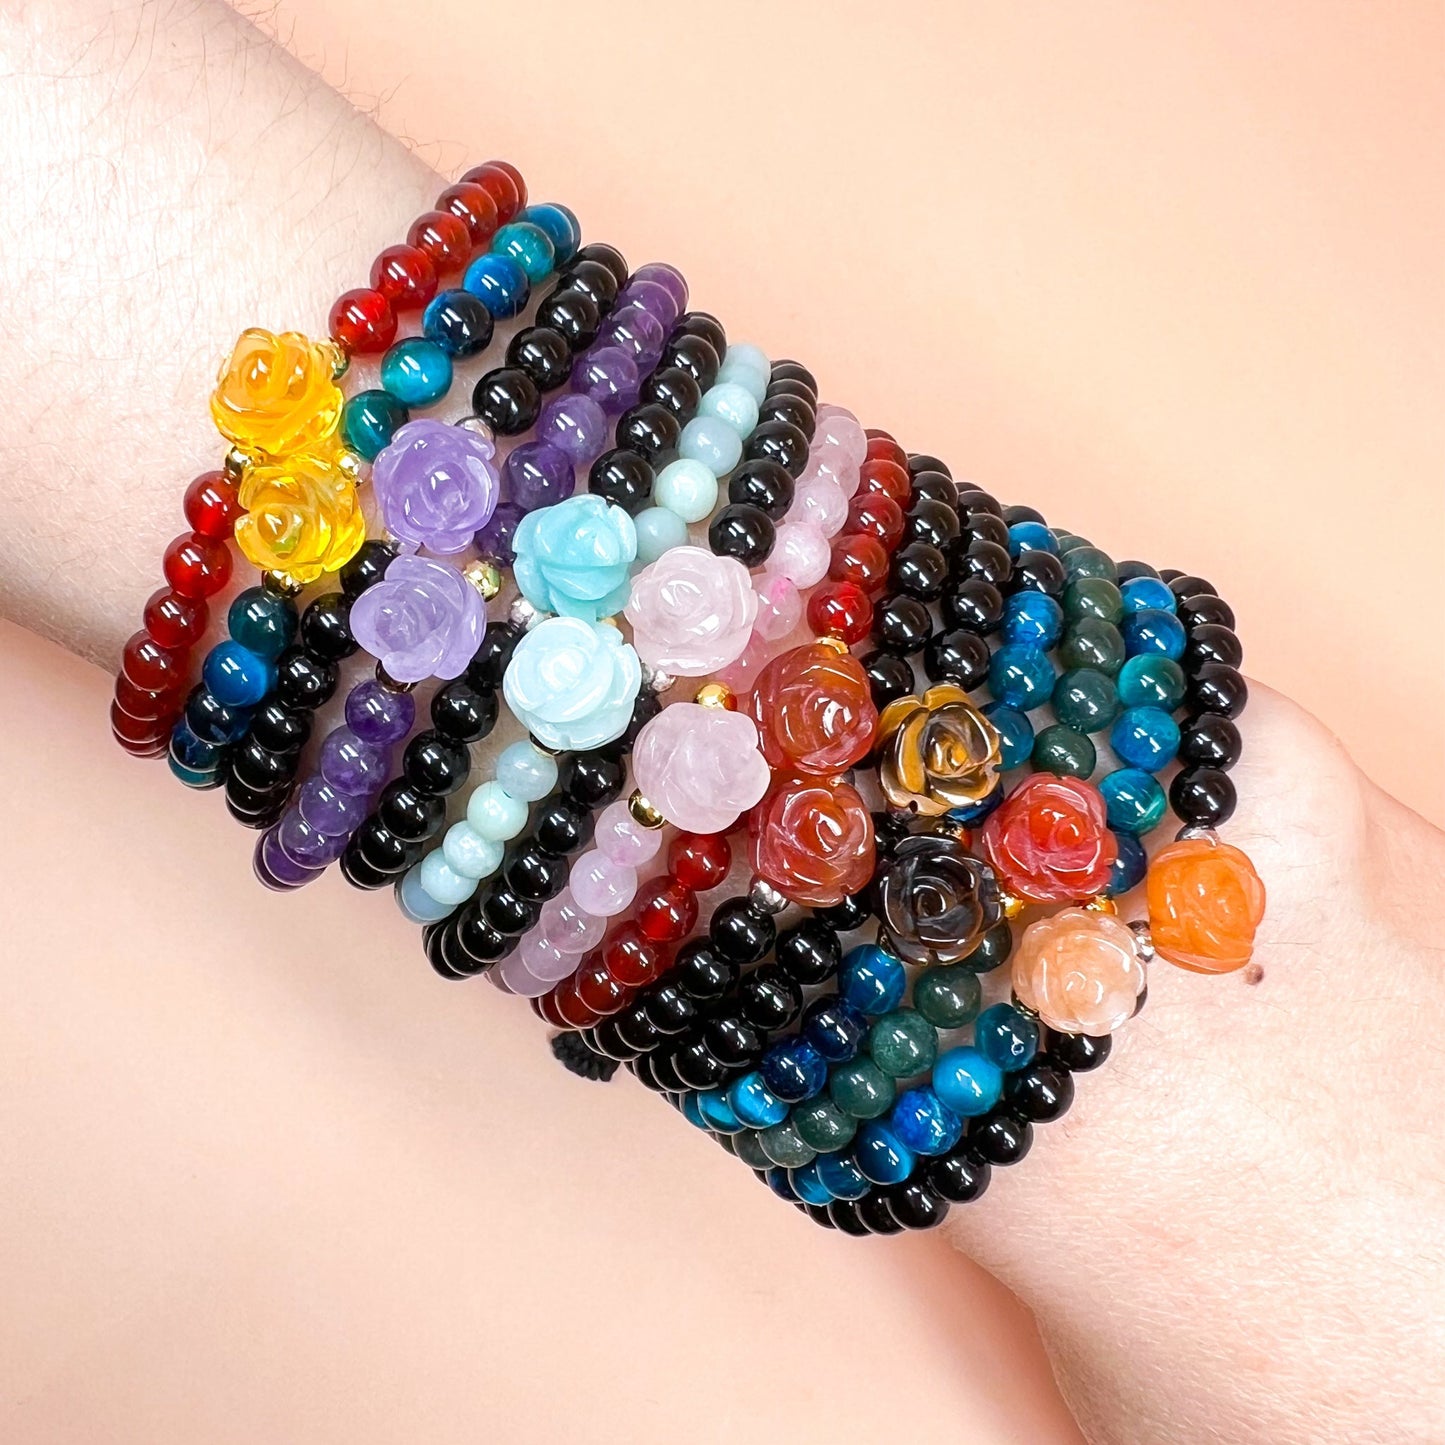 Rose gemstone bracelet for protection and good luck